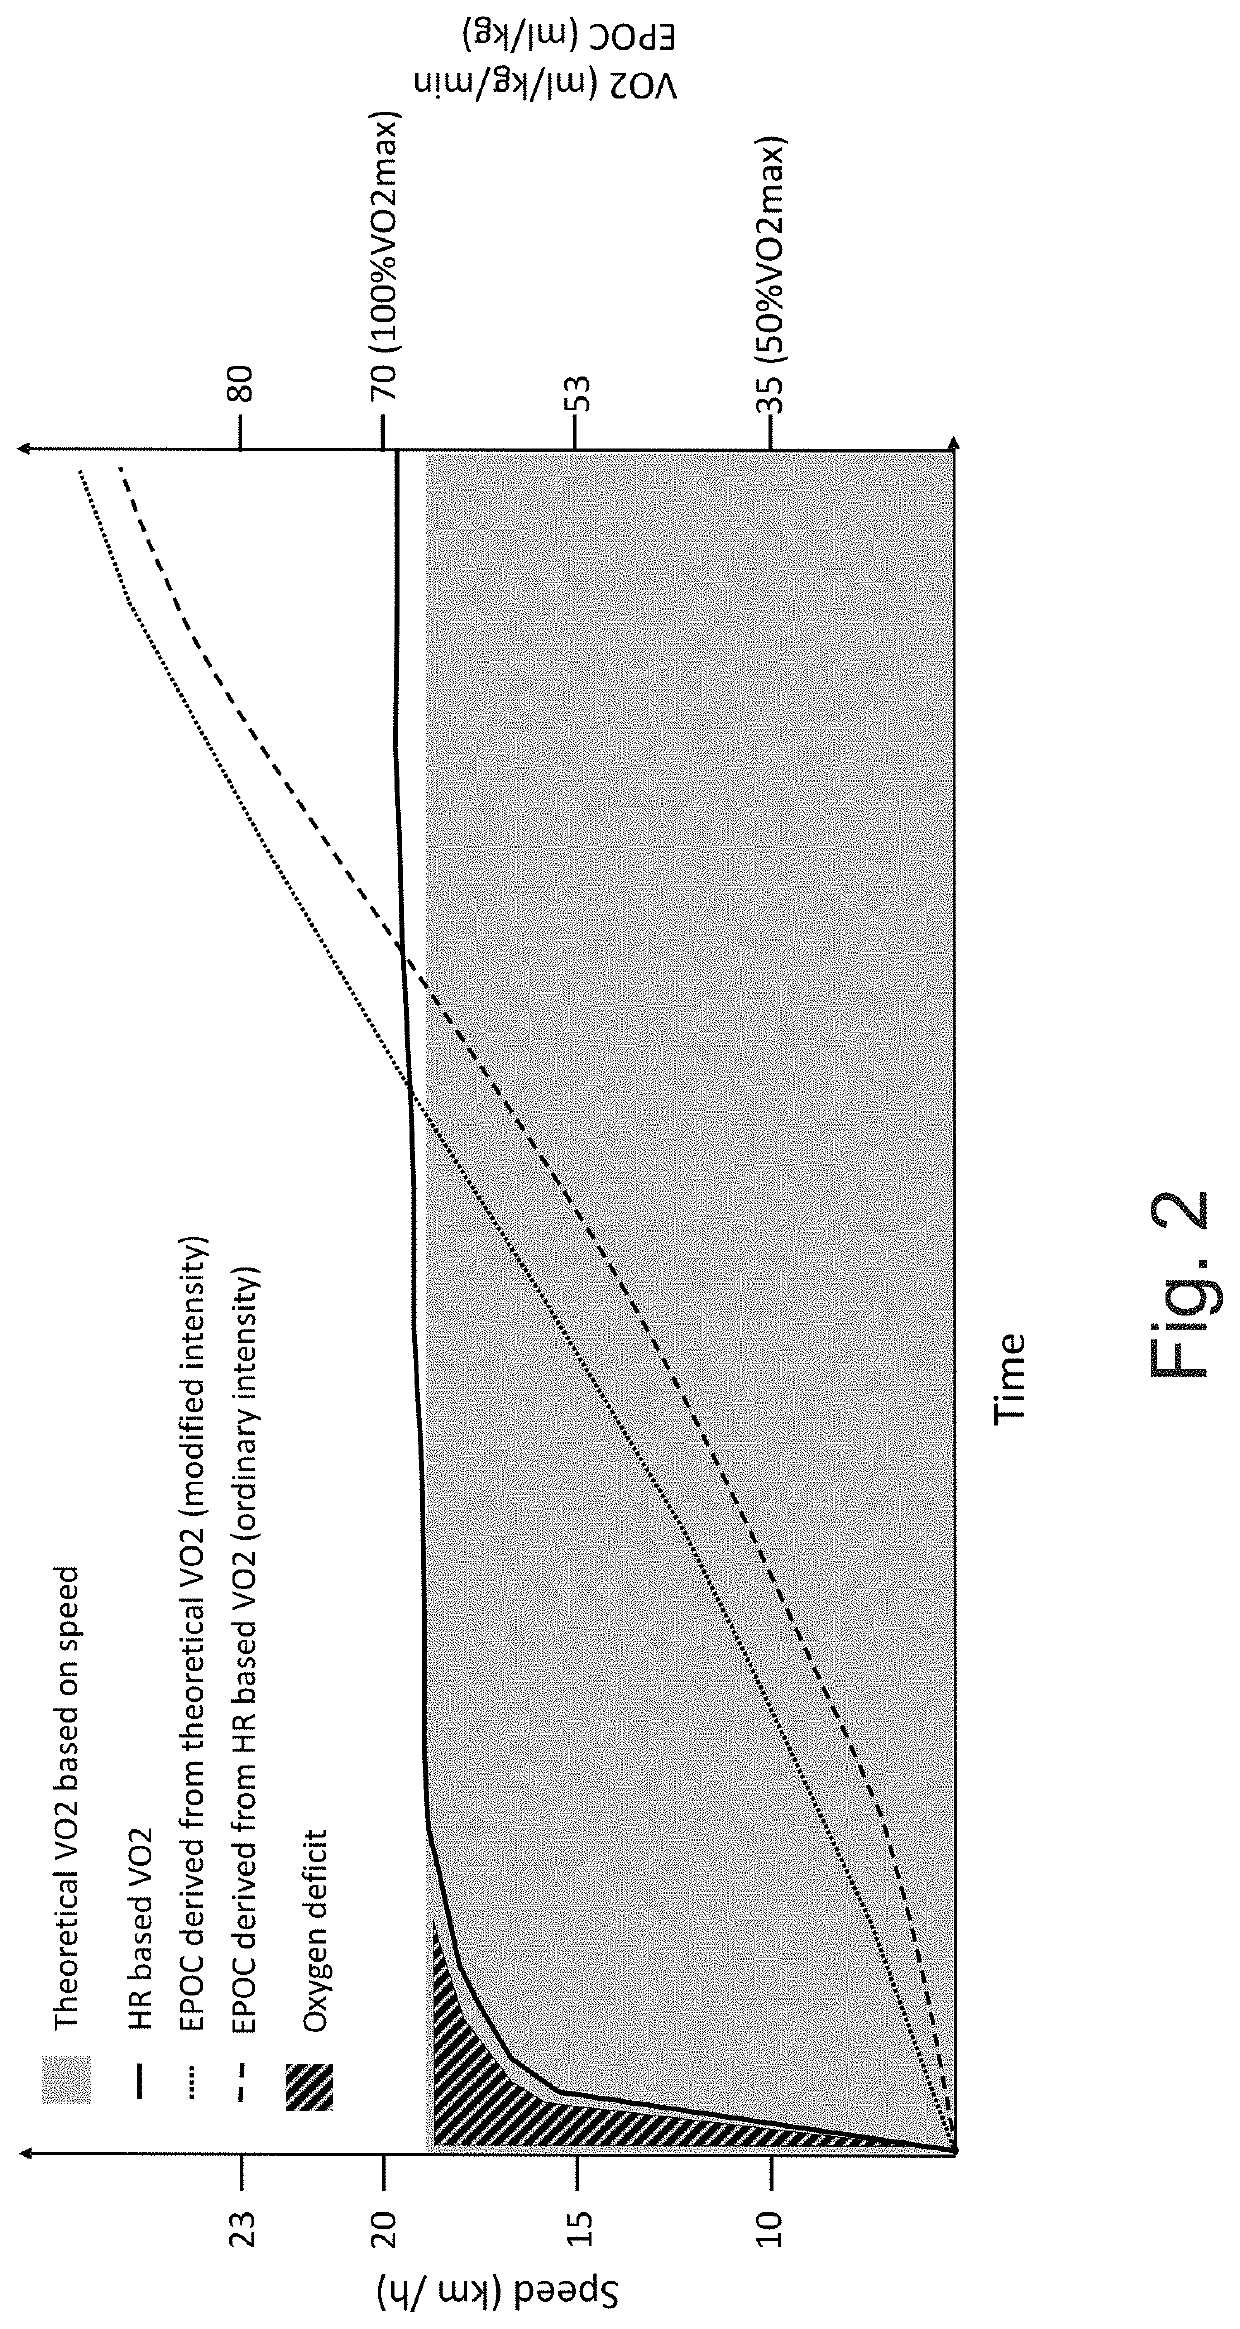 Methods and apparatus for analyzing and providing feedback of training effects, primary exercise benefits, training status, balance between training intensities and an automatic feedback system and apparatus for guiding future training